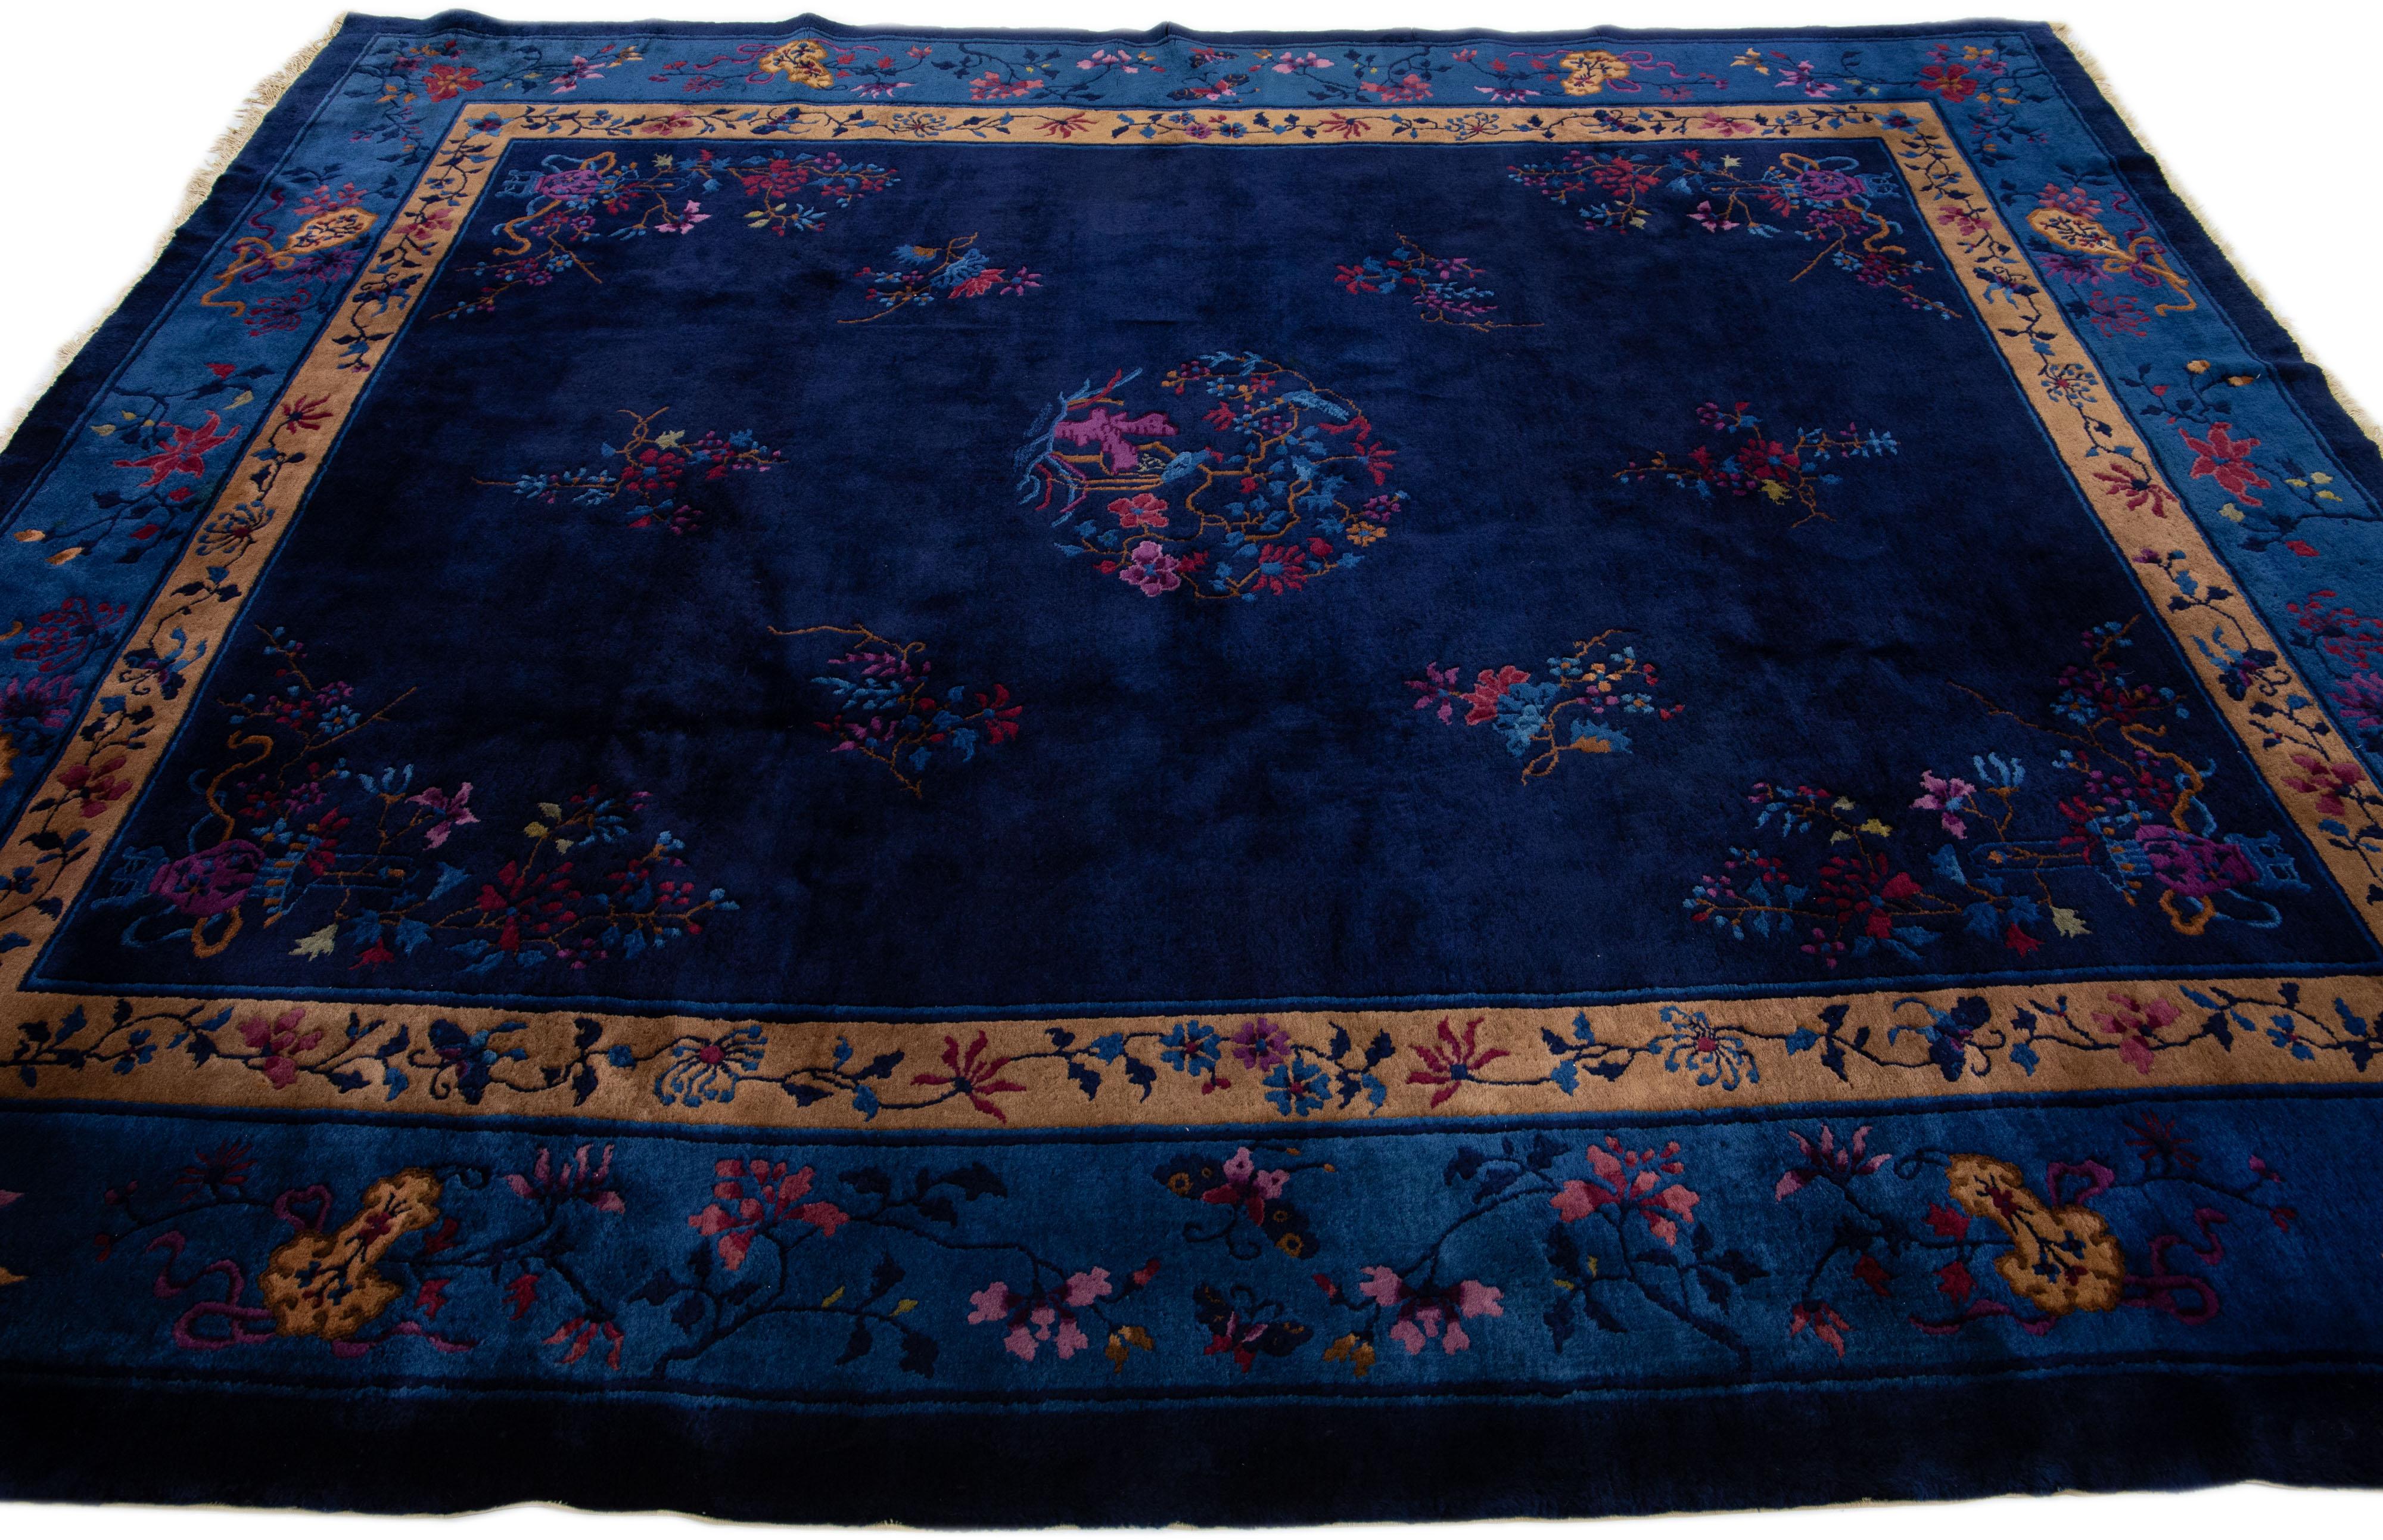 Antique Peking Handmade Chinese Blue Wool Rug with Traditional Floral Motif In Good Condition For Sale In Norwalk, CT